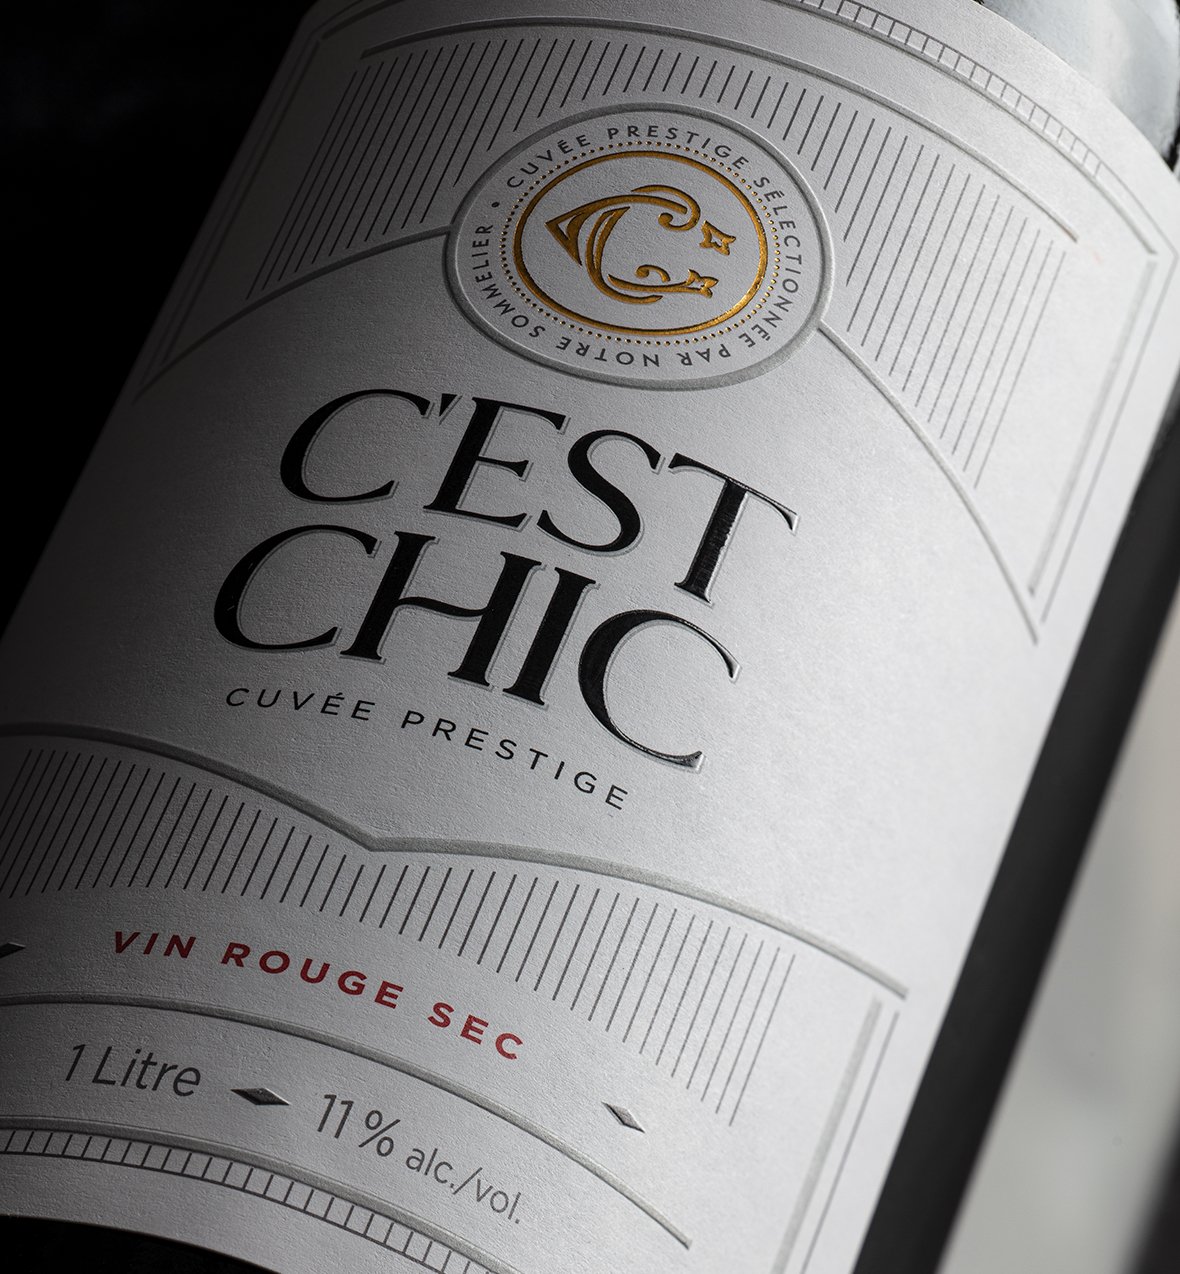 C'EST CHIC – Packaging Of The World